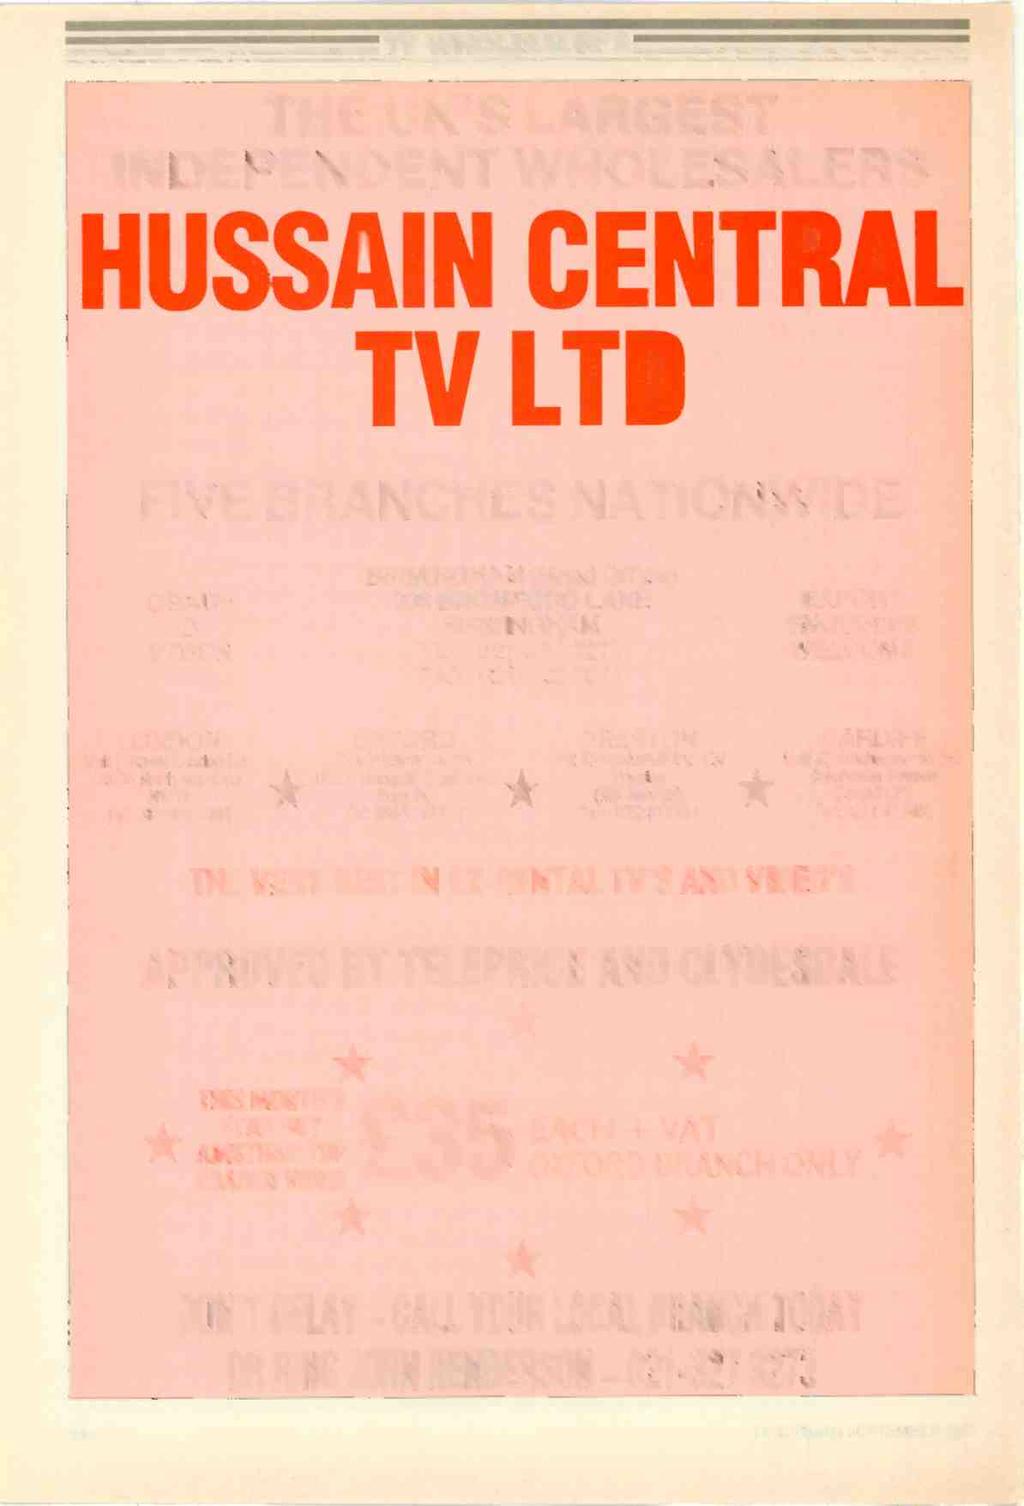 THE UK'S LARGEST INDEPENDENT WHOLESALERS HUSSAIN CENTRAL TV LTD FIVE BRANCHES NATIONWIDE BIRMINGHAM (Head Office) GRADE 208 BROMFORD